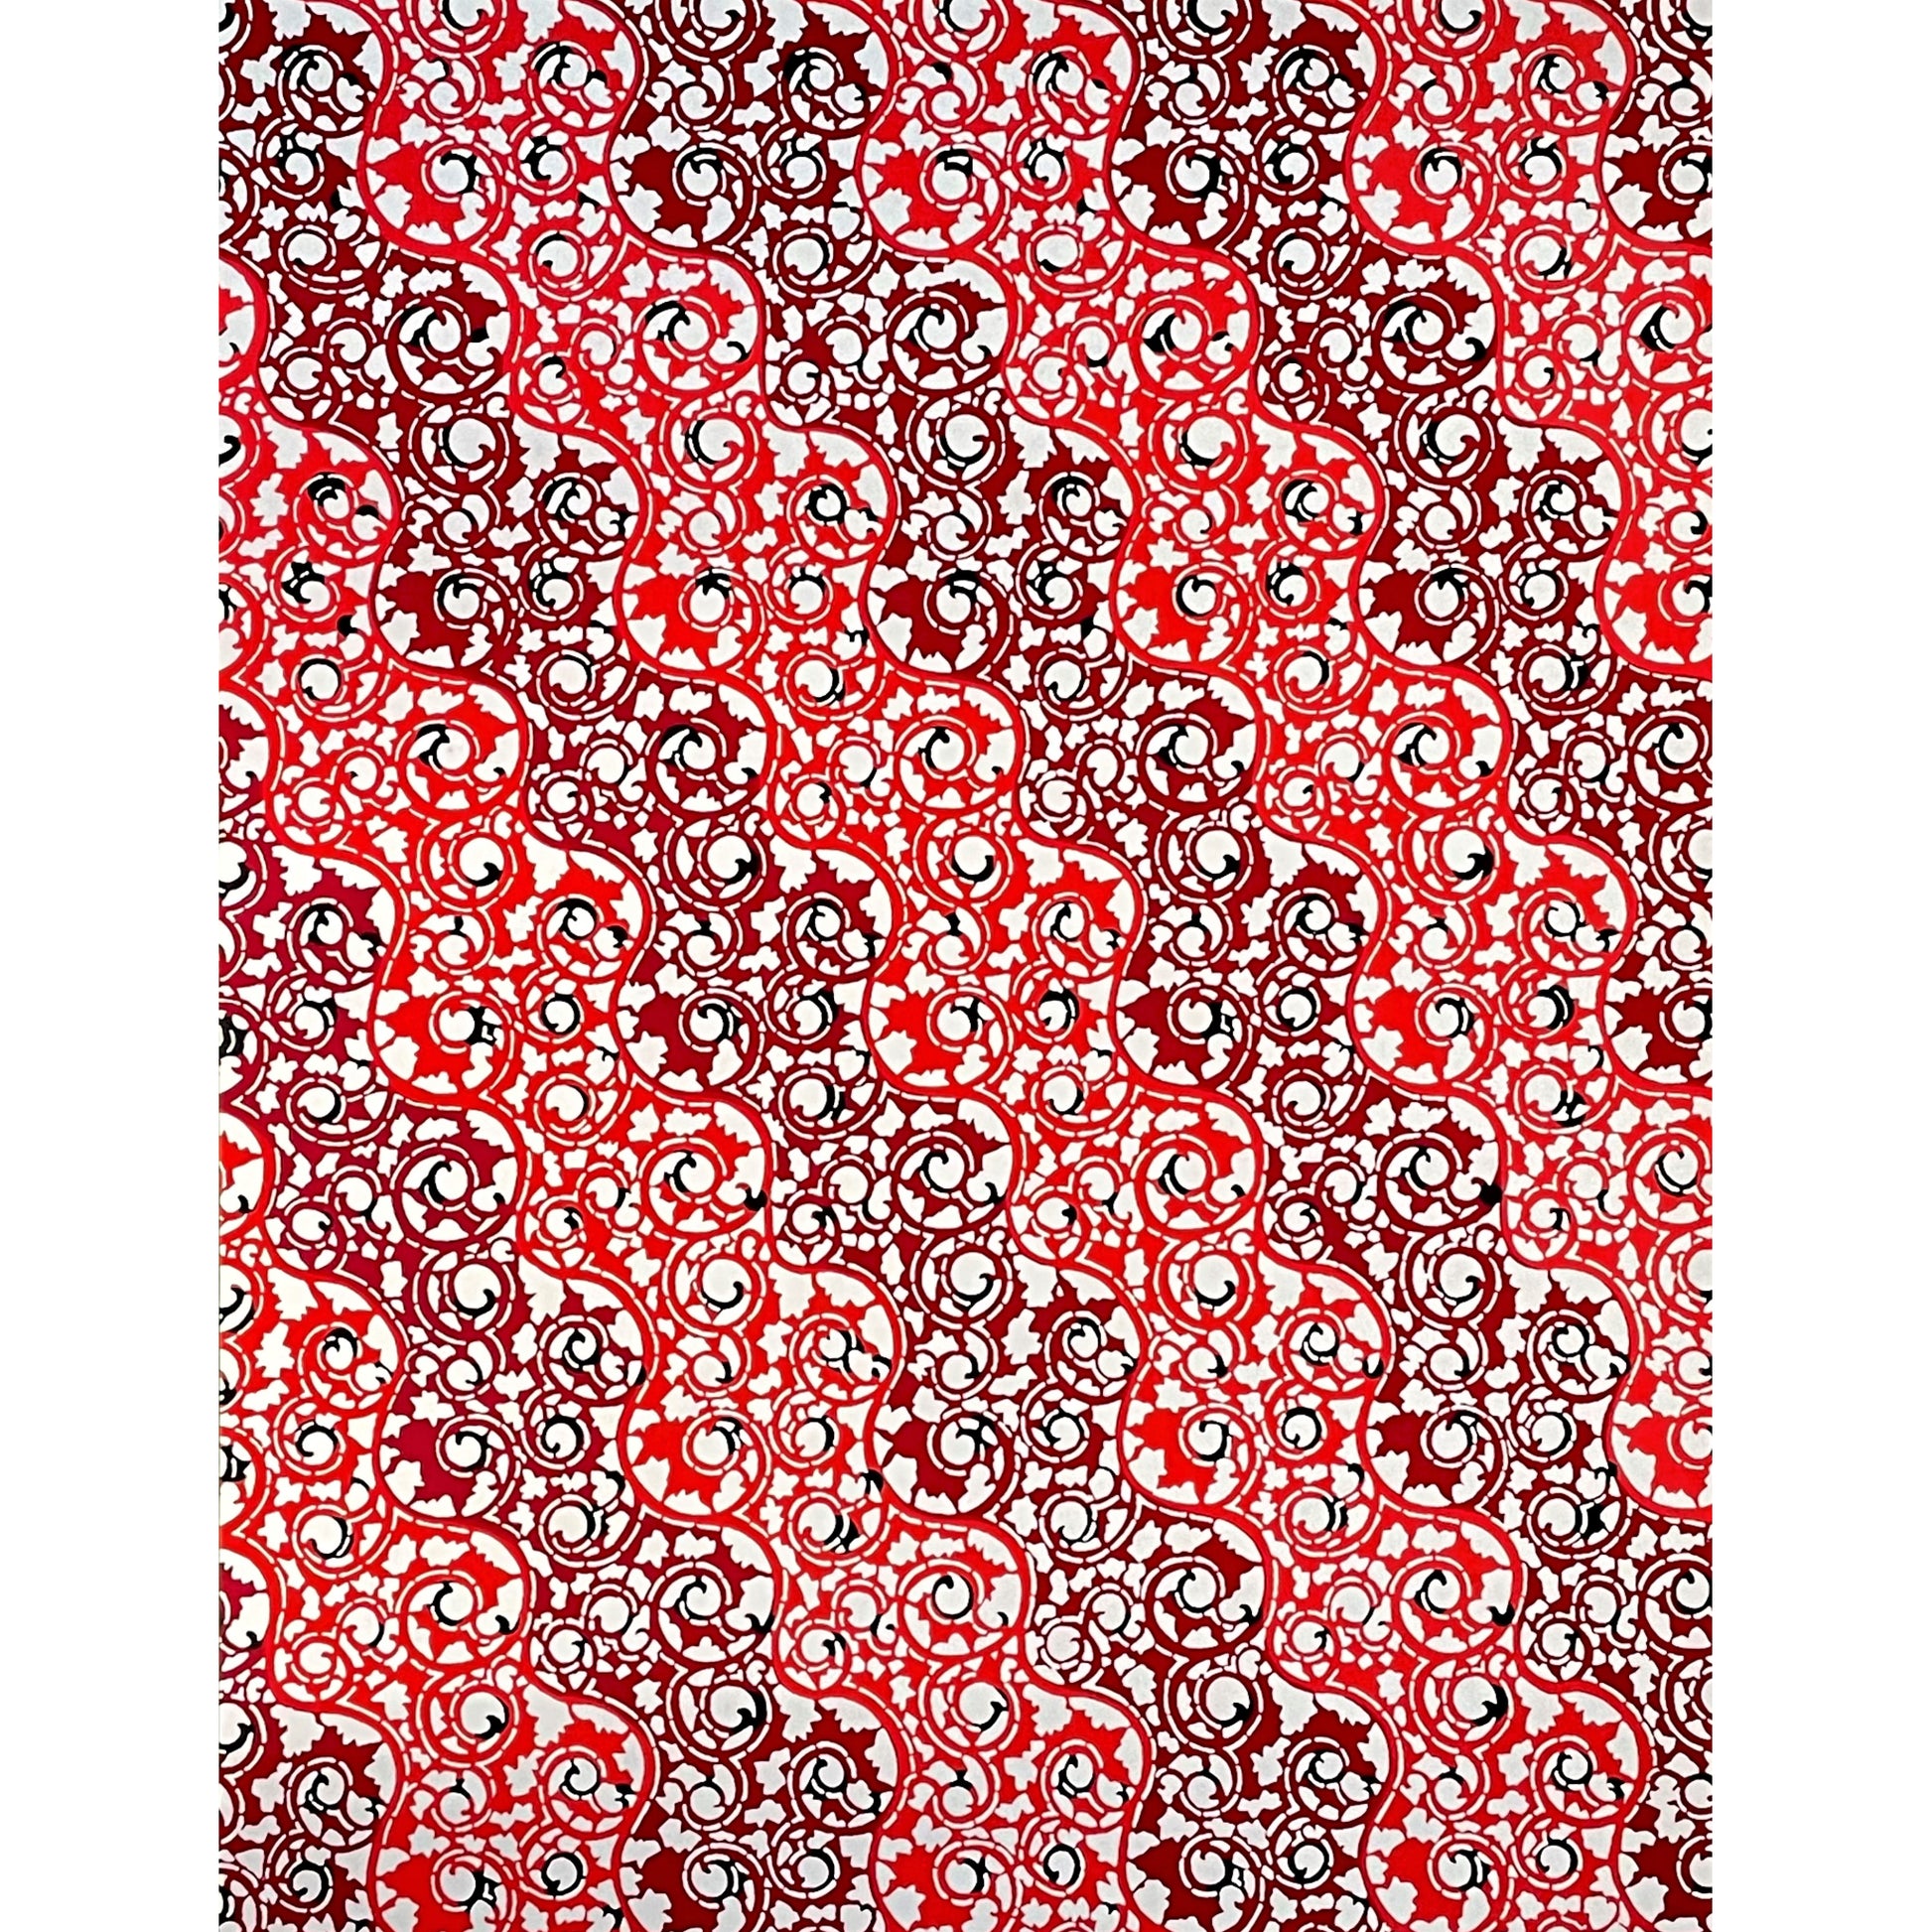 japanese stencil-dyed handmade paper with traditional arabesque vine pattern in red and maroon, full size sheet